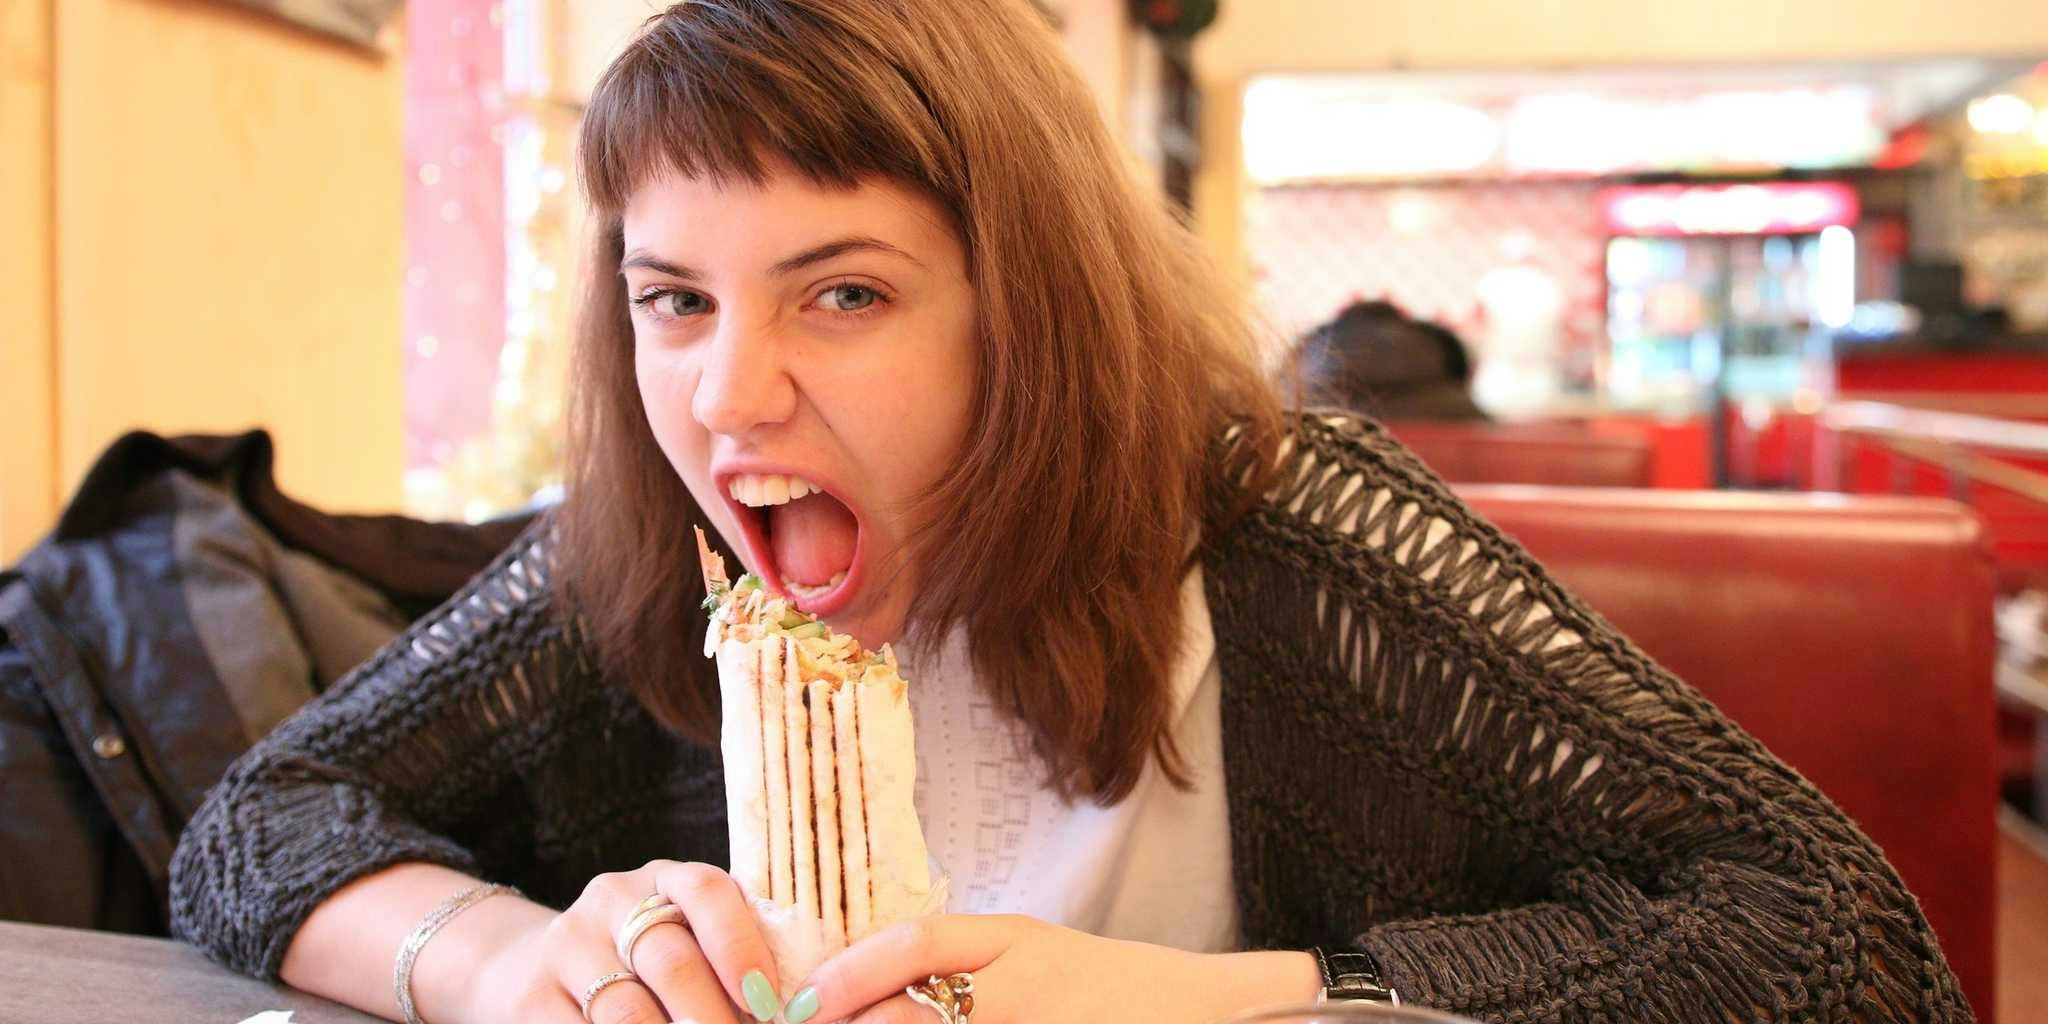 Russian Women Are Posing For Sexy Selfies While Holding Shawarma The